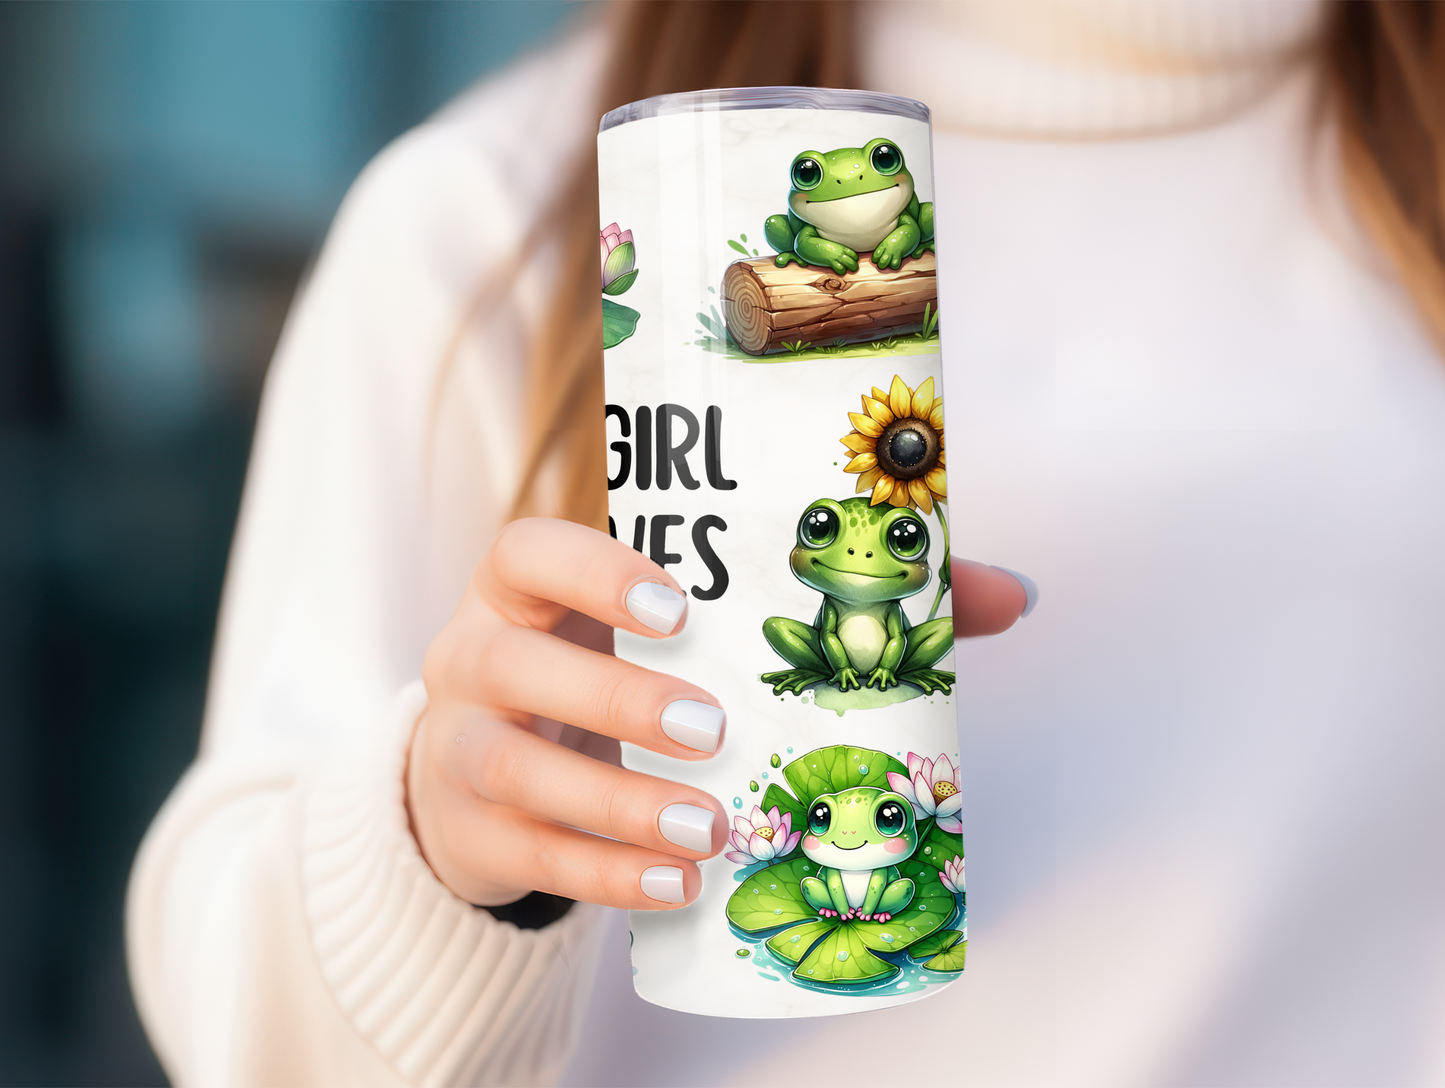 Just A Girl Who Loves Frogs 20oz Tumbler